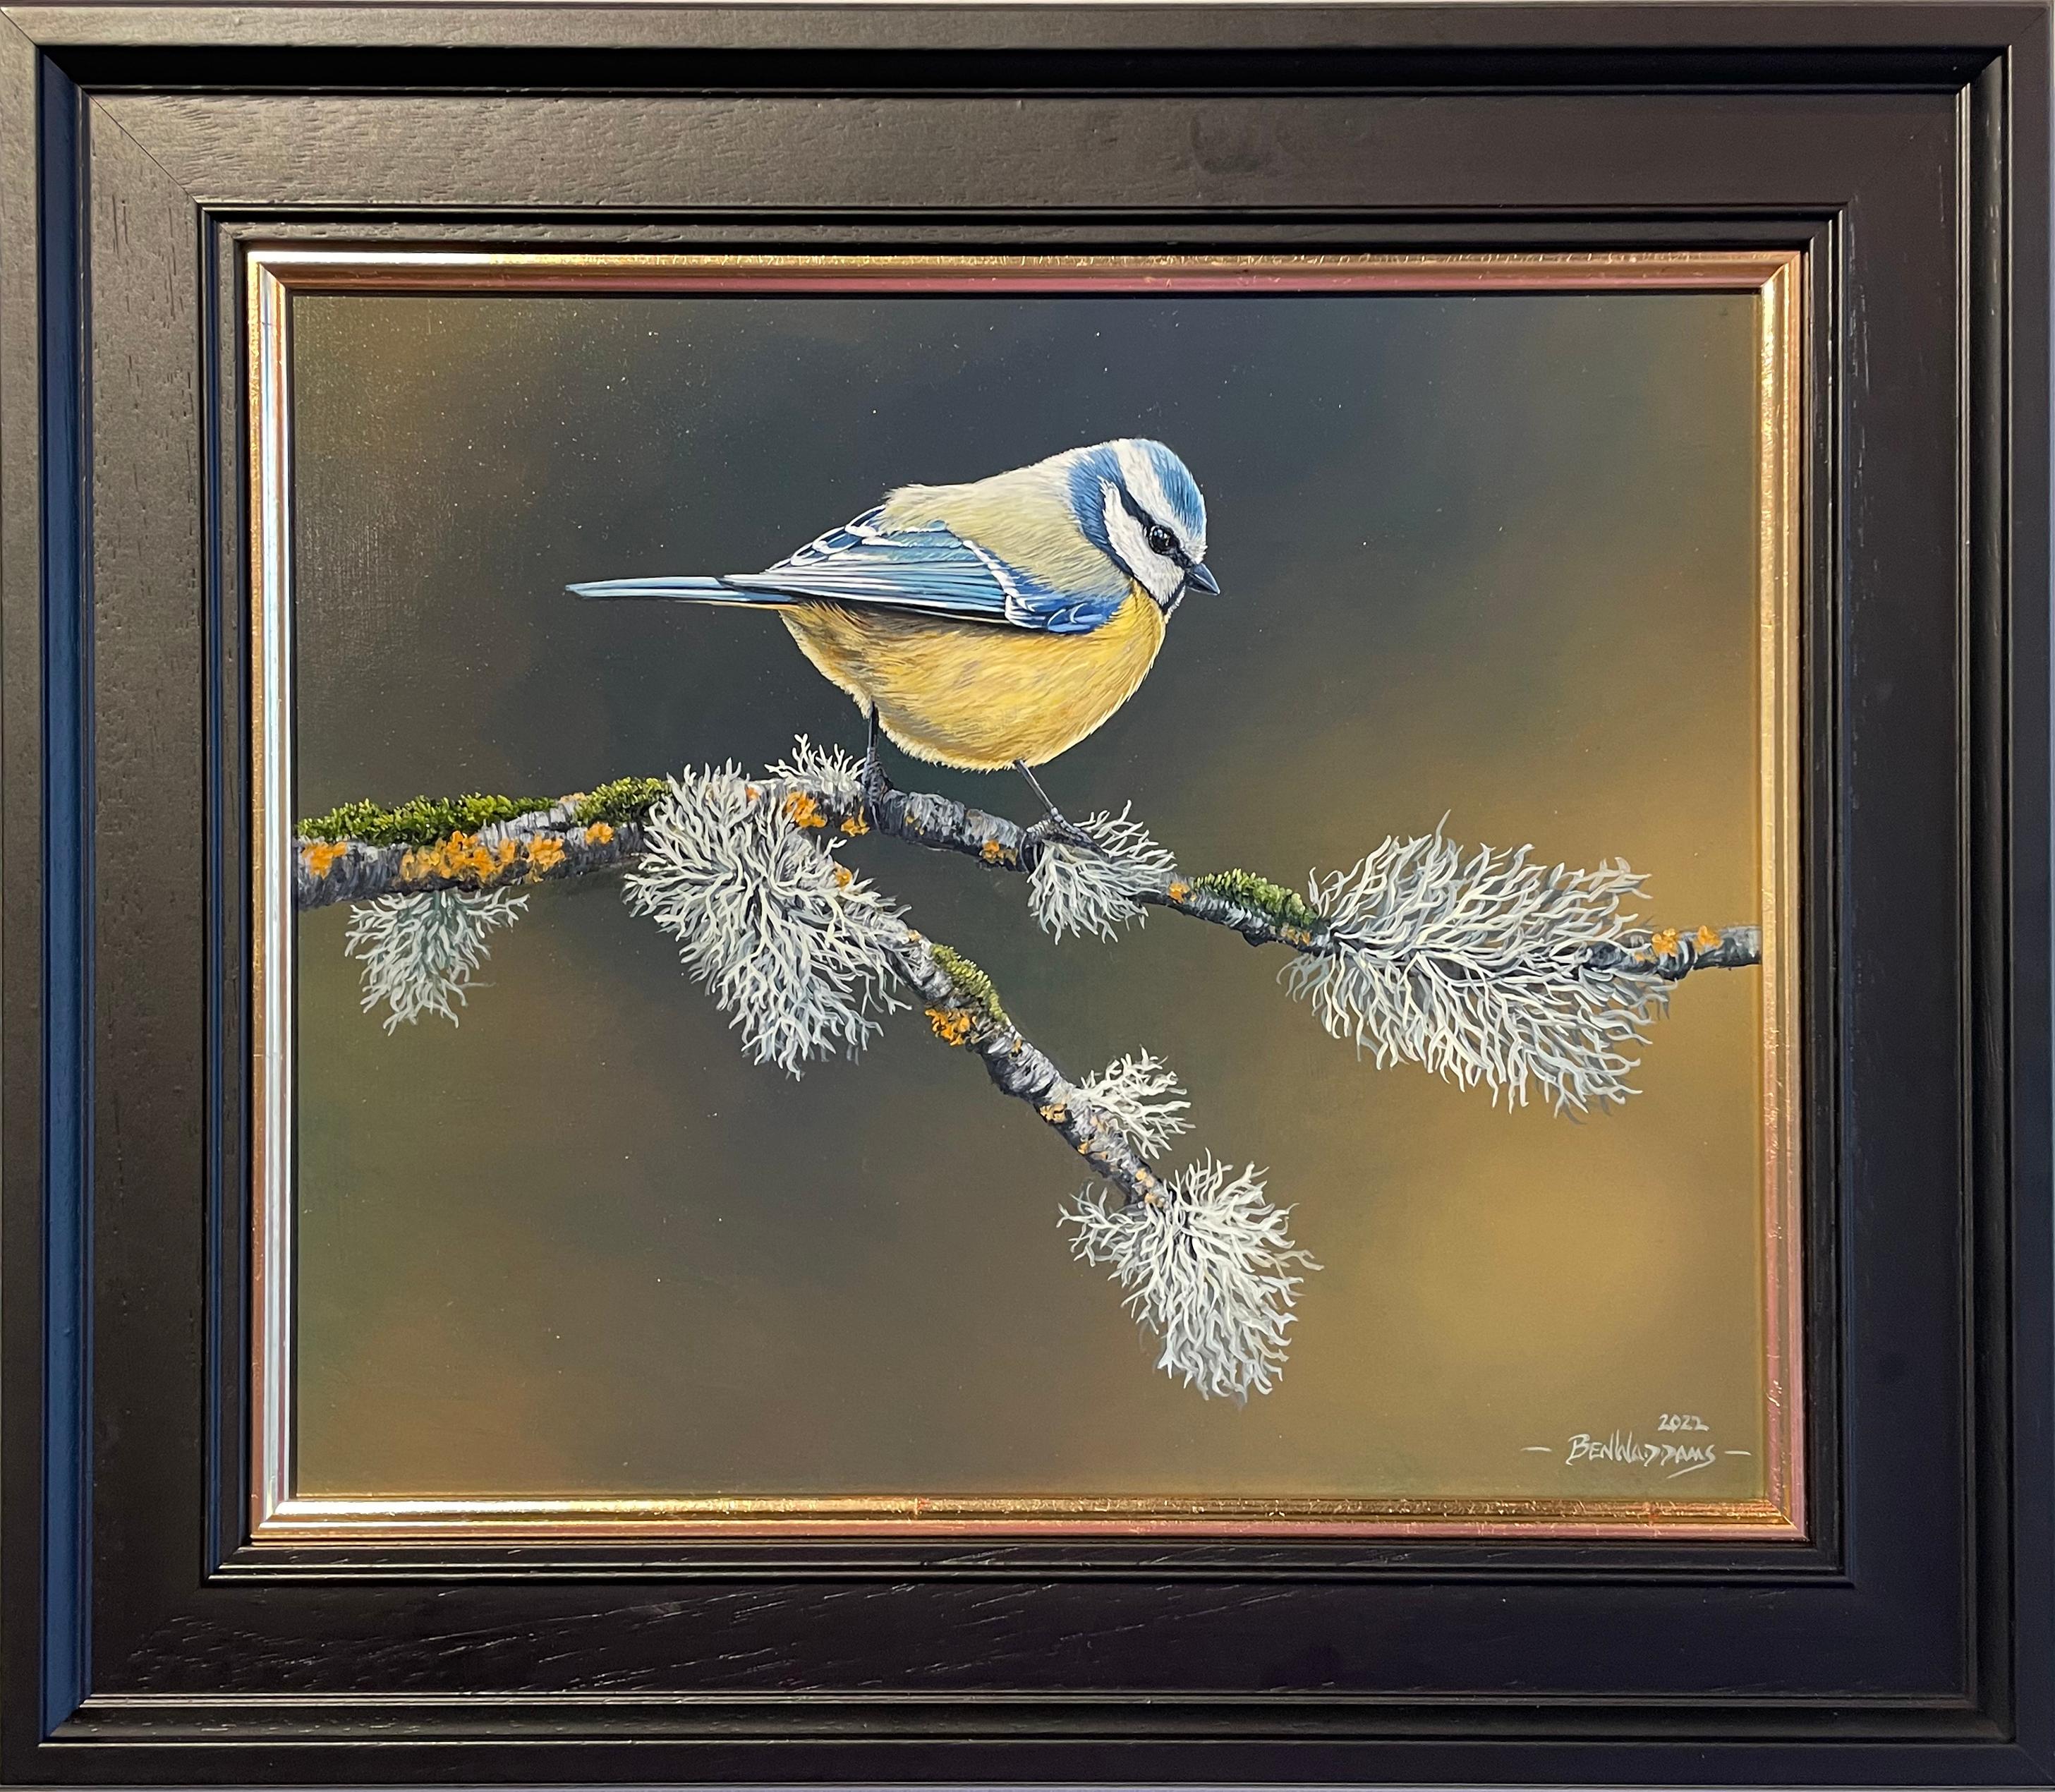 Balancing Act" Contemporary Photorealist painting of Blue Tit bird in the wild